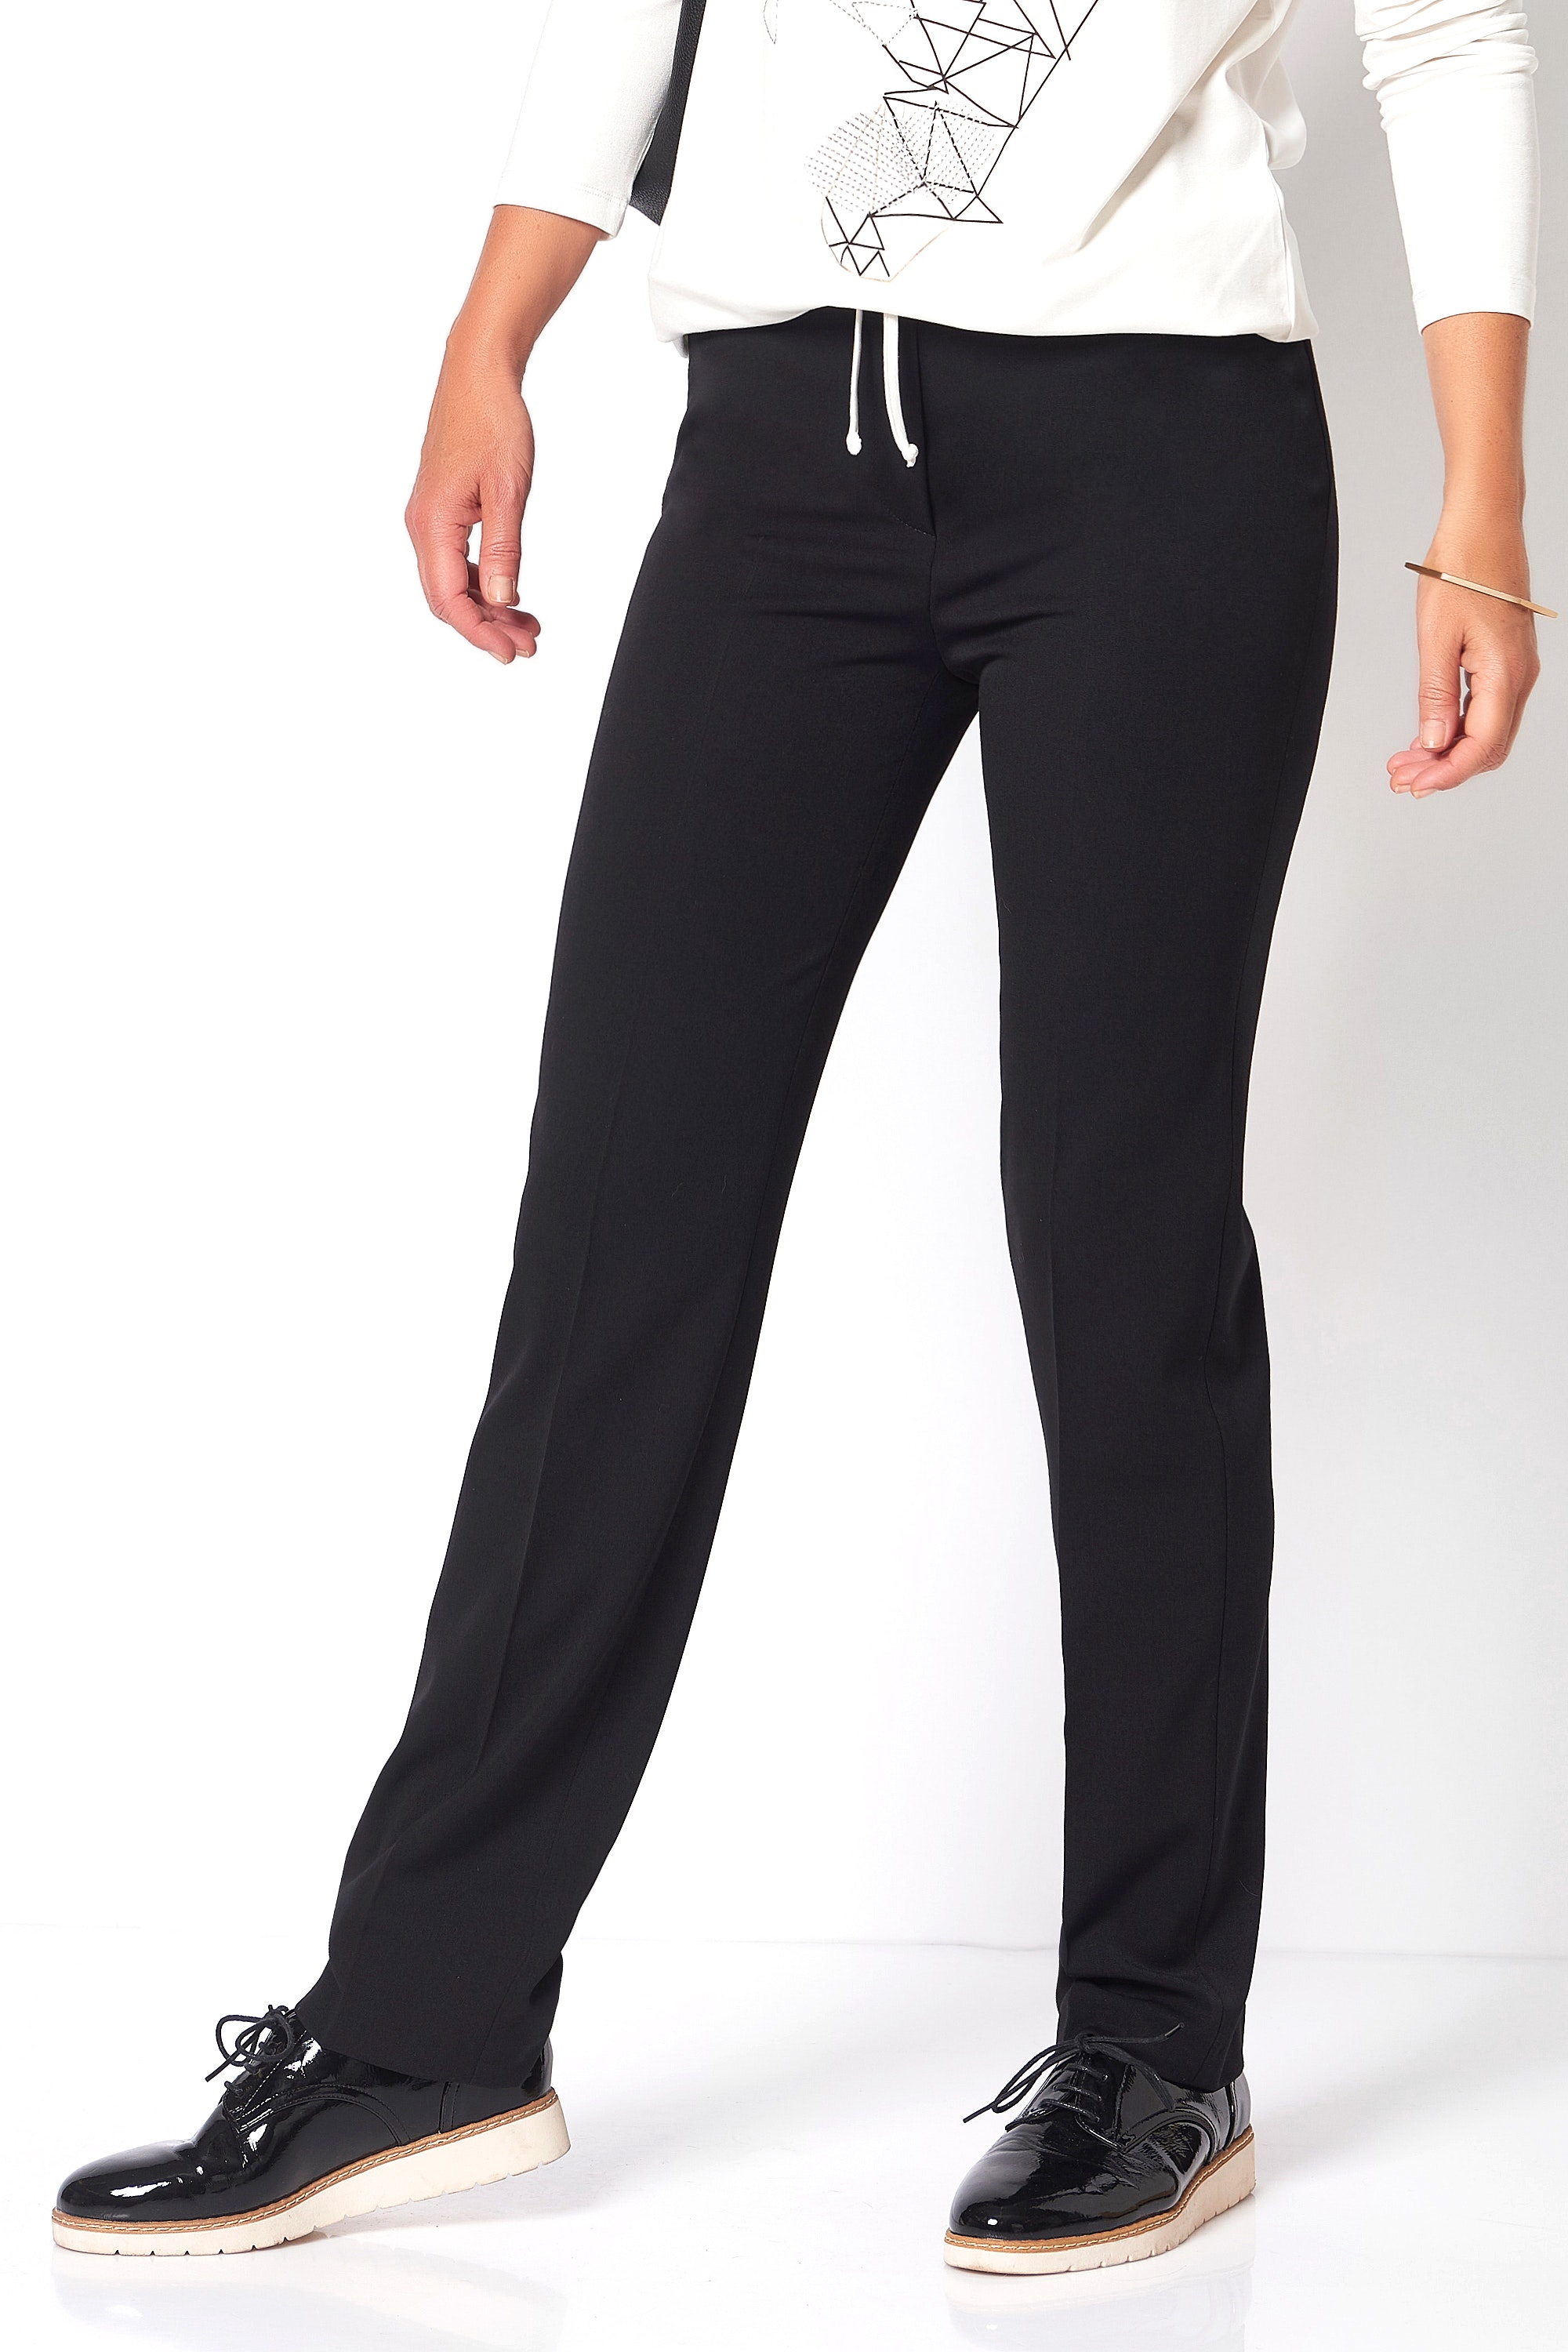 RELAXED BY TONI Damenhose Jade Slim Fit